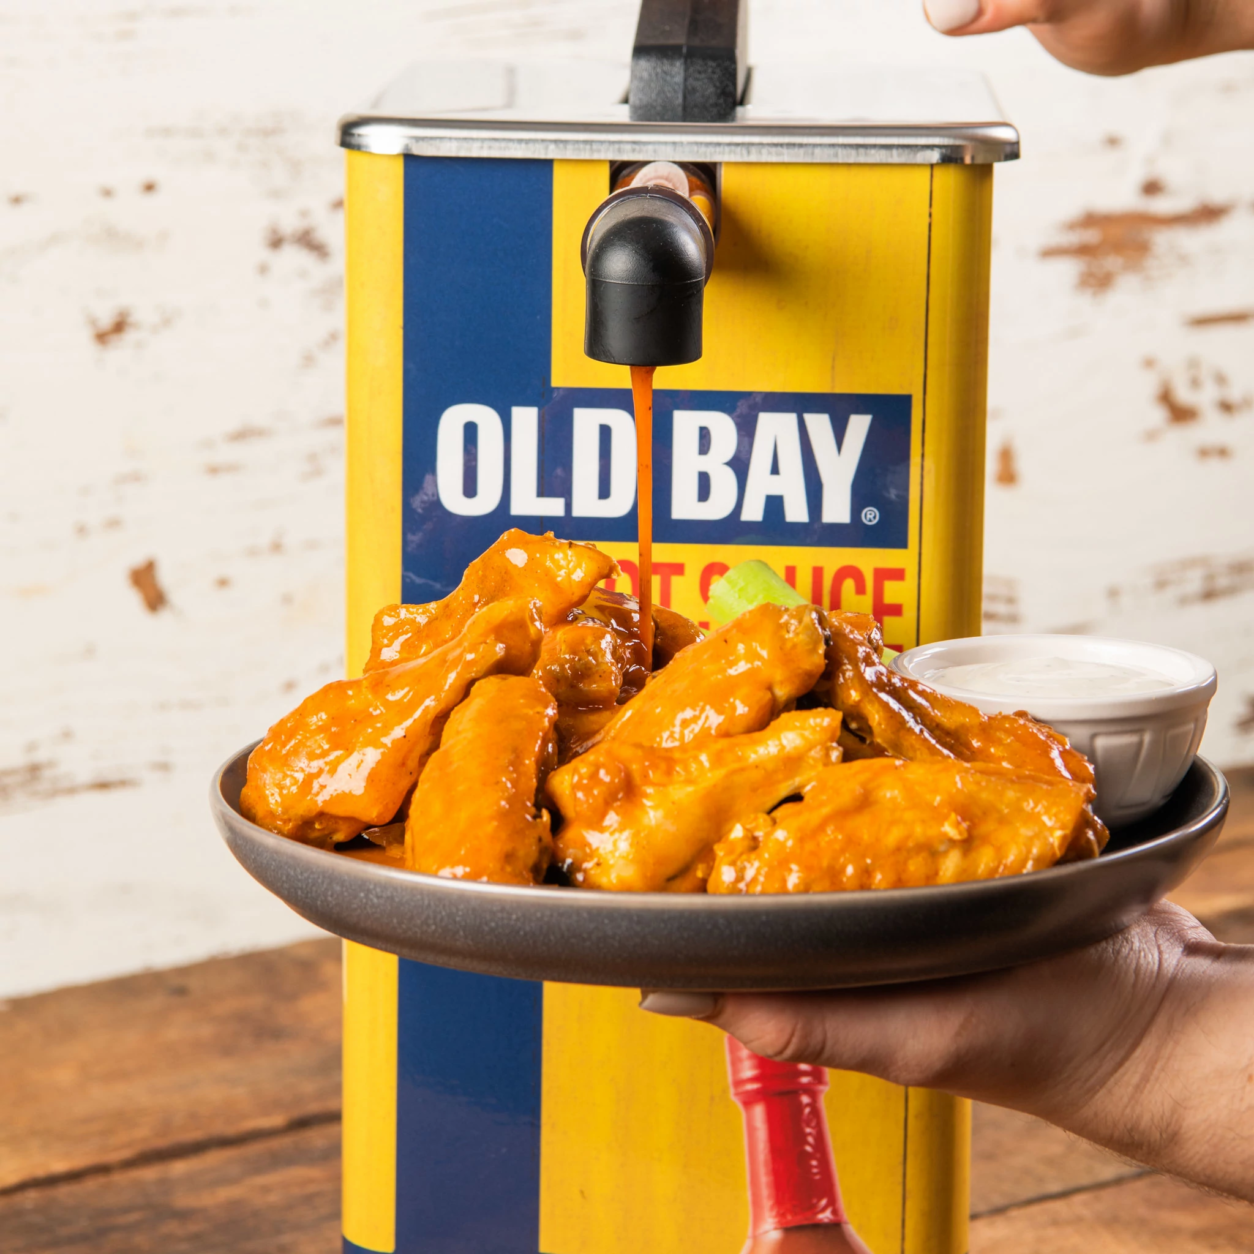 <h3><a href="https://shop.mccormick.com/products/old-bay-hot-sauce-dispenser-with-1-5-gallon-pouch" target="_blank" rel="noopener">Old Bay hot sauce dispenser</a> ($159.95)</h3>
<p>Buying in bulk minimizes those trips to the supermarket, so here&#8217;s a way to stay well-stocked on Old Bay&#8217;s &#8220;tangy-with-a-kick&#8221; hot sauce.</p>
<p>The dispenser&#8217;s got a 1.5-gallon capacity and even includes 3 gallons of sauce.</p>
<p>Finally, an easy way for you Marylanders to pour it over your breakfast cereal just so.</p>
<p>(Oh, be advised that <a href="https://shop.mccormick.com/collections/old-bay/products/old-bay-yellow-face-masks-set-of-4" target="_blank" rel="noopener">Old Bay sells masks, too</a>.)</p>
